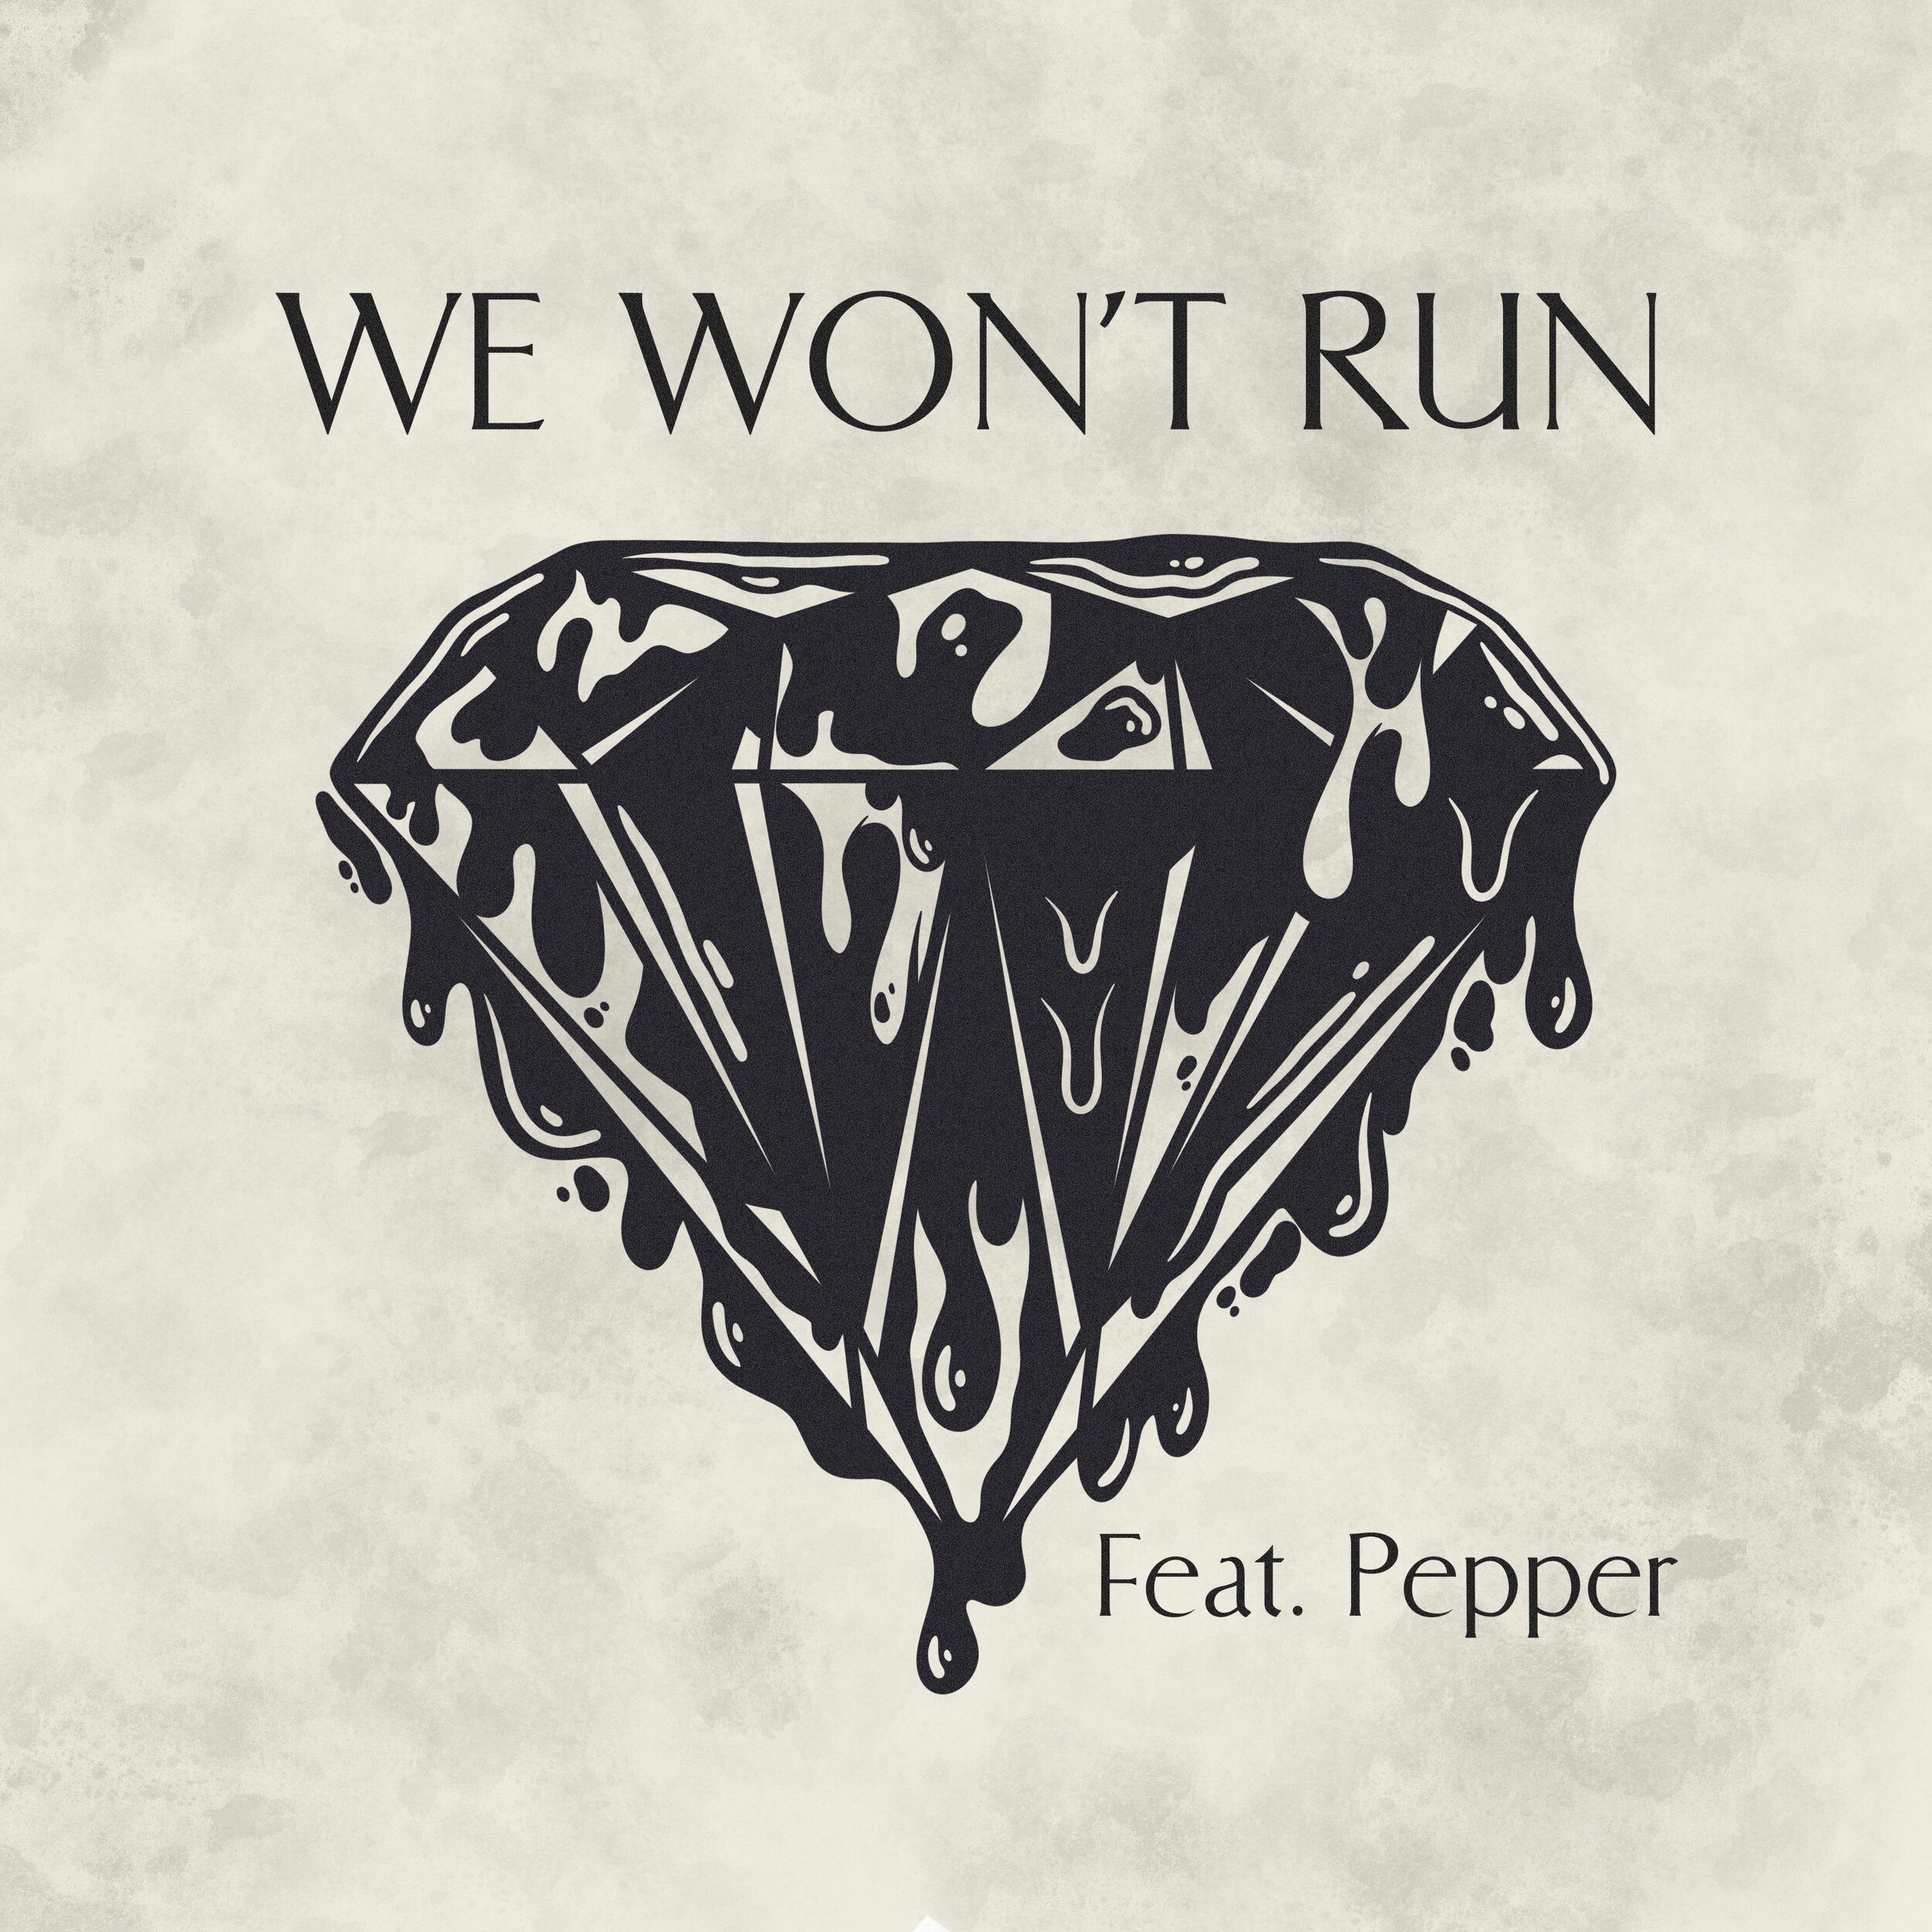 Cydeways delivers potent protest anthem with new single “We Won’t Run”